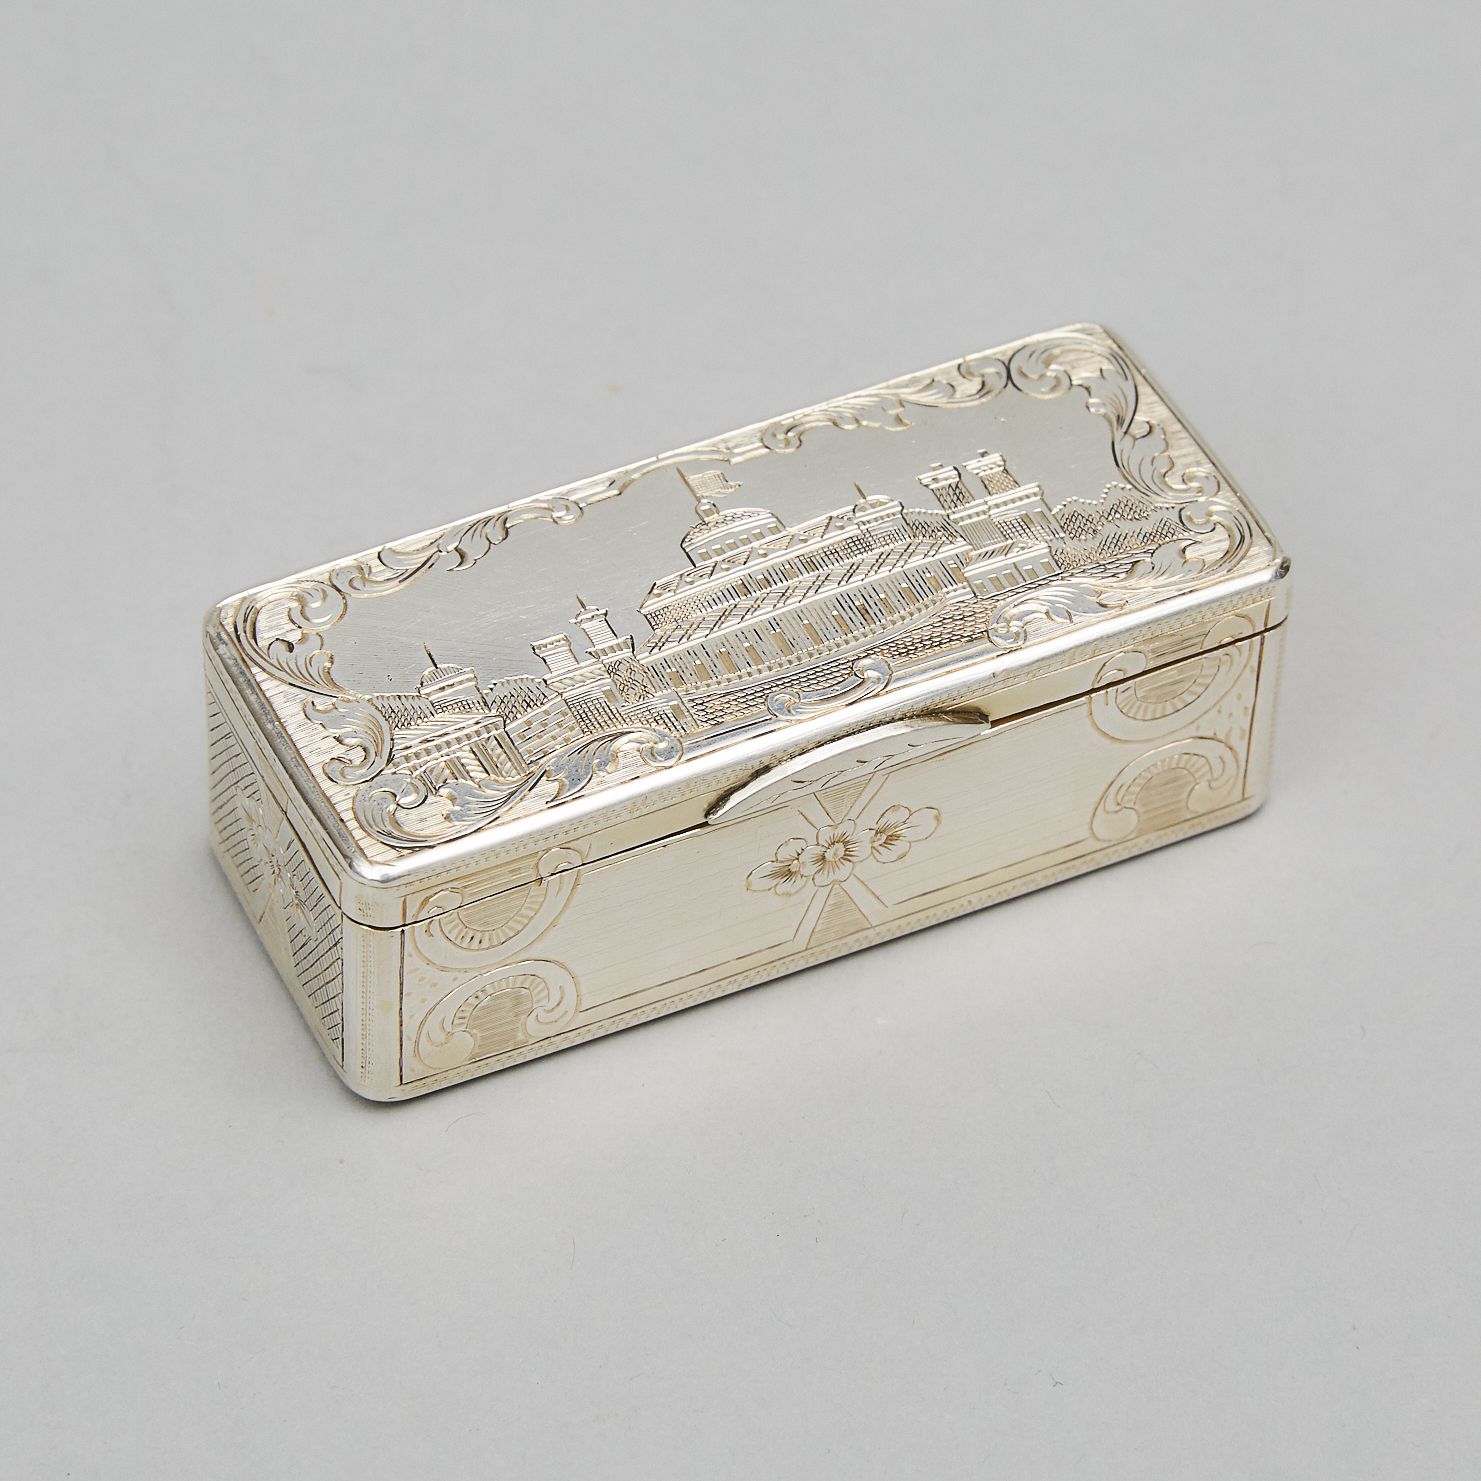 Russian Silver Rectangular Snuff Box, Moscow, 1871